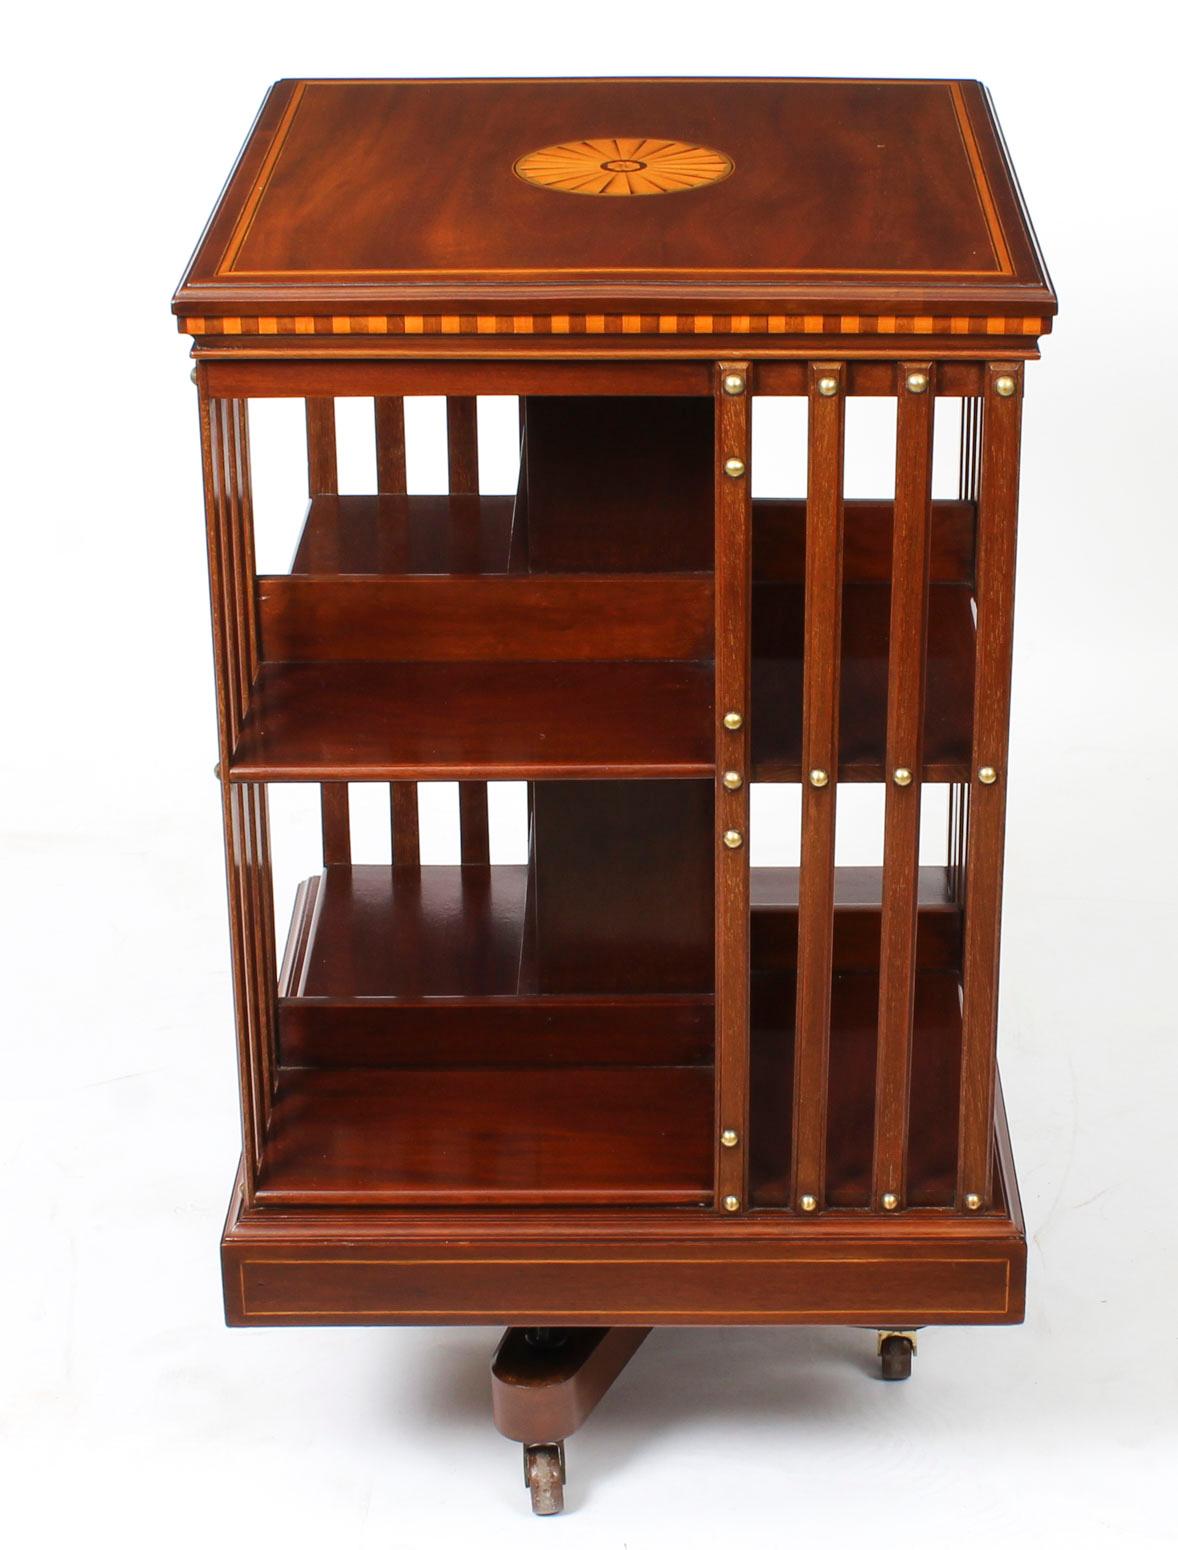 English Early 20th Century Edwardian Revolving Bookcase by Maple & Co